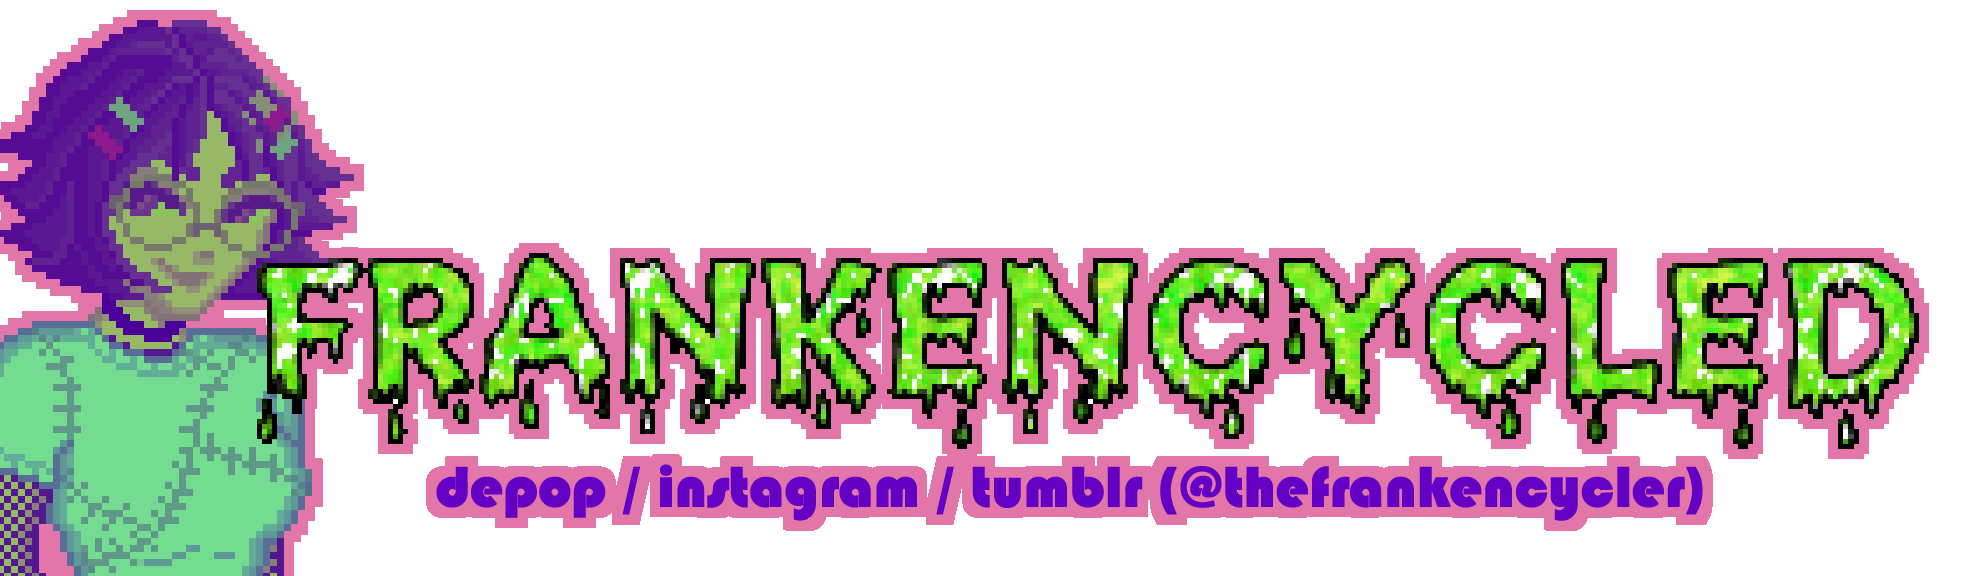 the logo for Frankencycled: 'Frankencycled' is written in large green pixelated letters that appear to be dripping slime. underneath, smaller purple text reads 'depop / instagram / tumblr (@thefrankencycler).' on the far left is a pixel doll from the waist up; it depicts the webmaster in stylized colors, mainly purple and green. they have light skin, round glasses, choppy bobbed hair, a stitched-together looking t-shirt, and they are smiling.